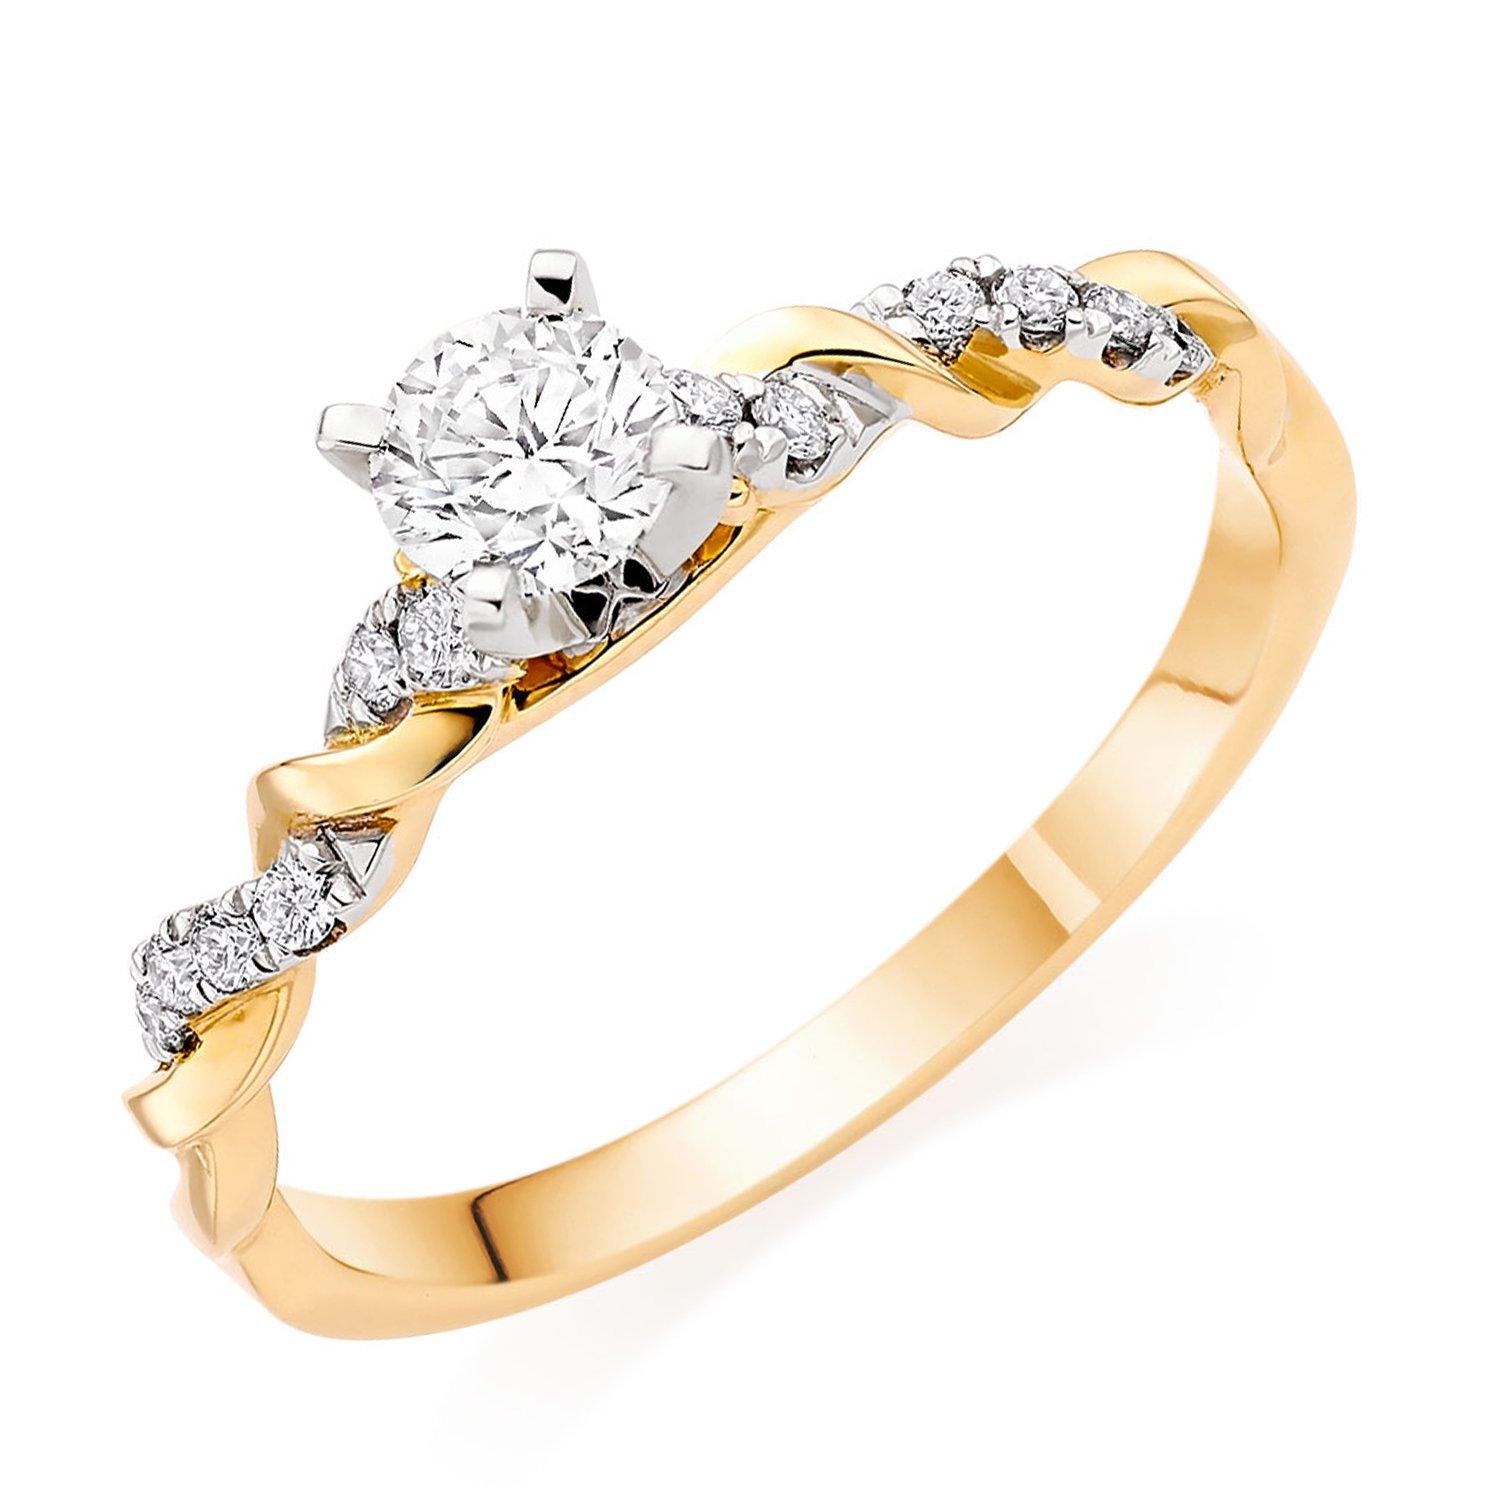 Entwine 18ct Yellow Gold Diamond Solitaire Ring | 0114612 ...